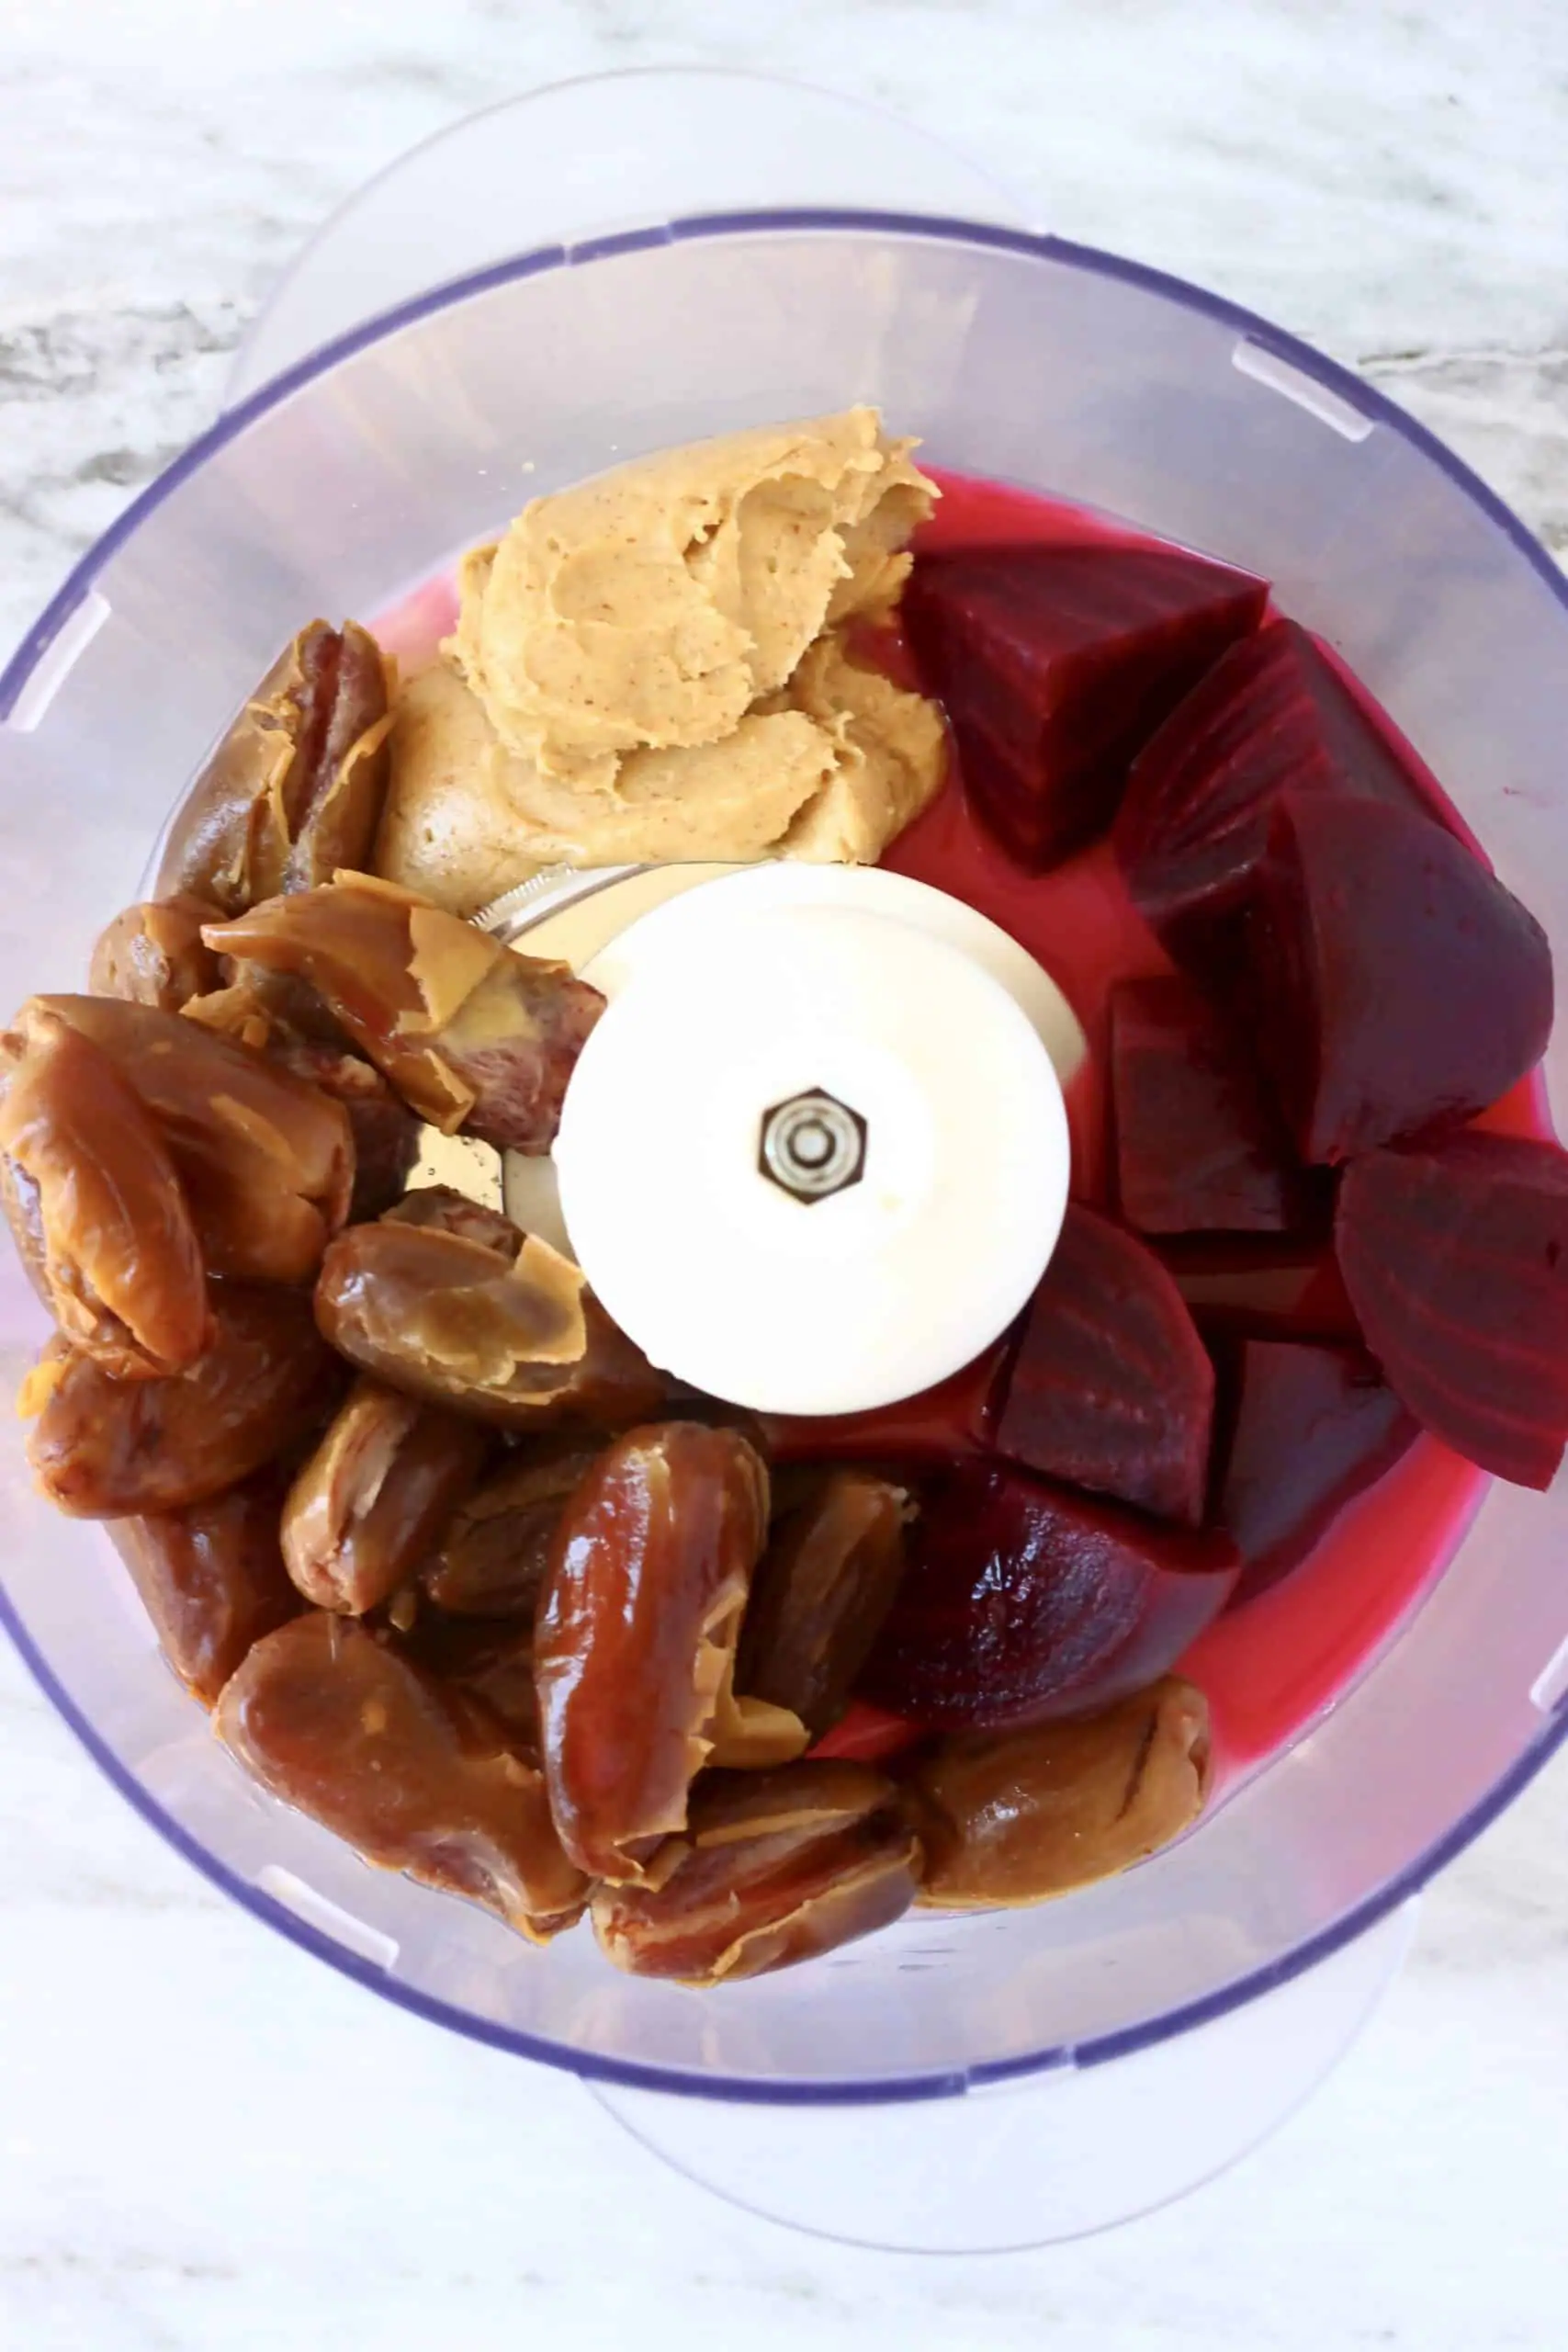 Dates, cooked diced beetroot, almond butter and almond milk in a food processor